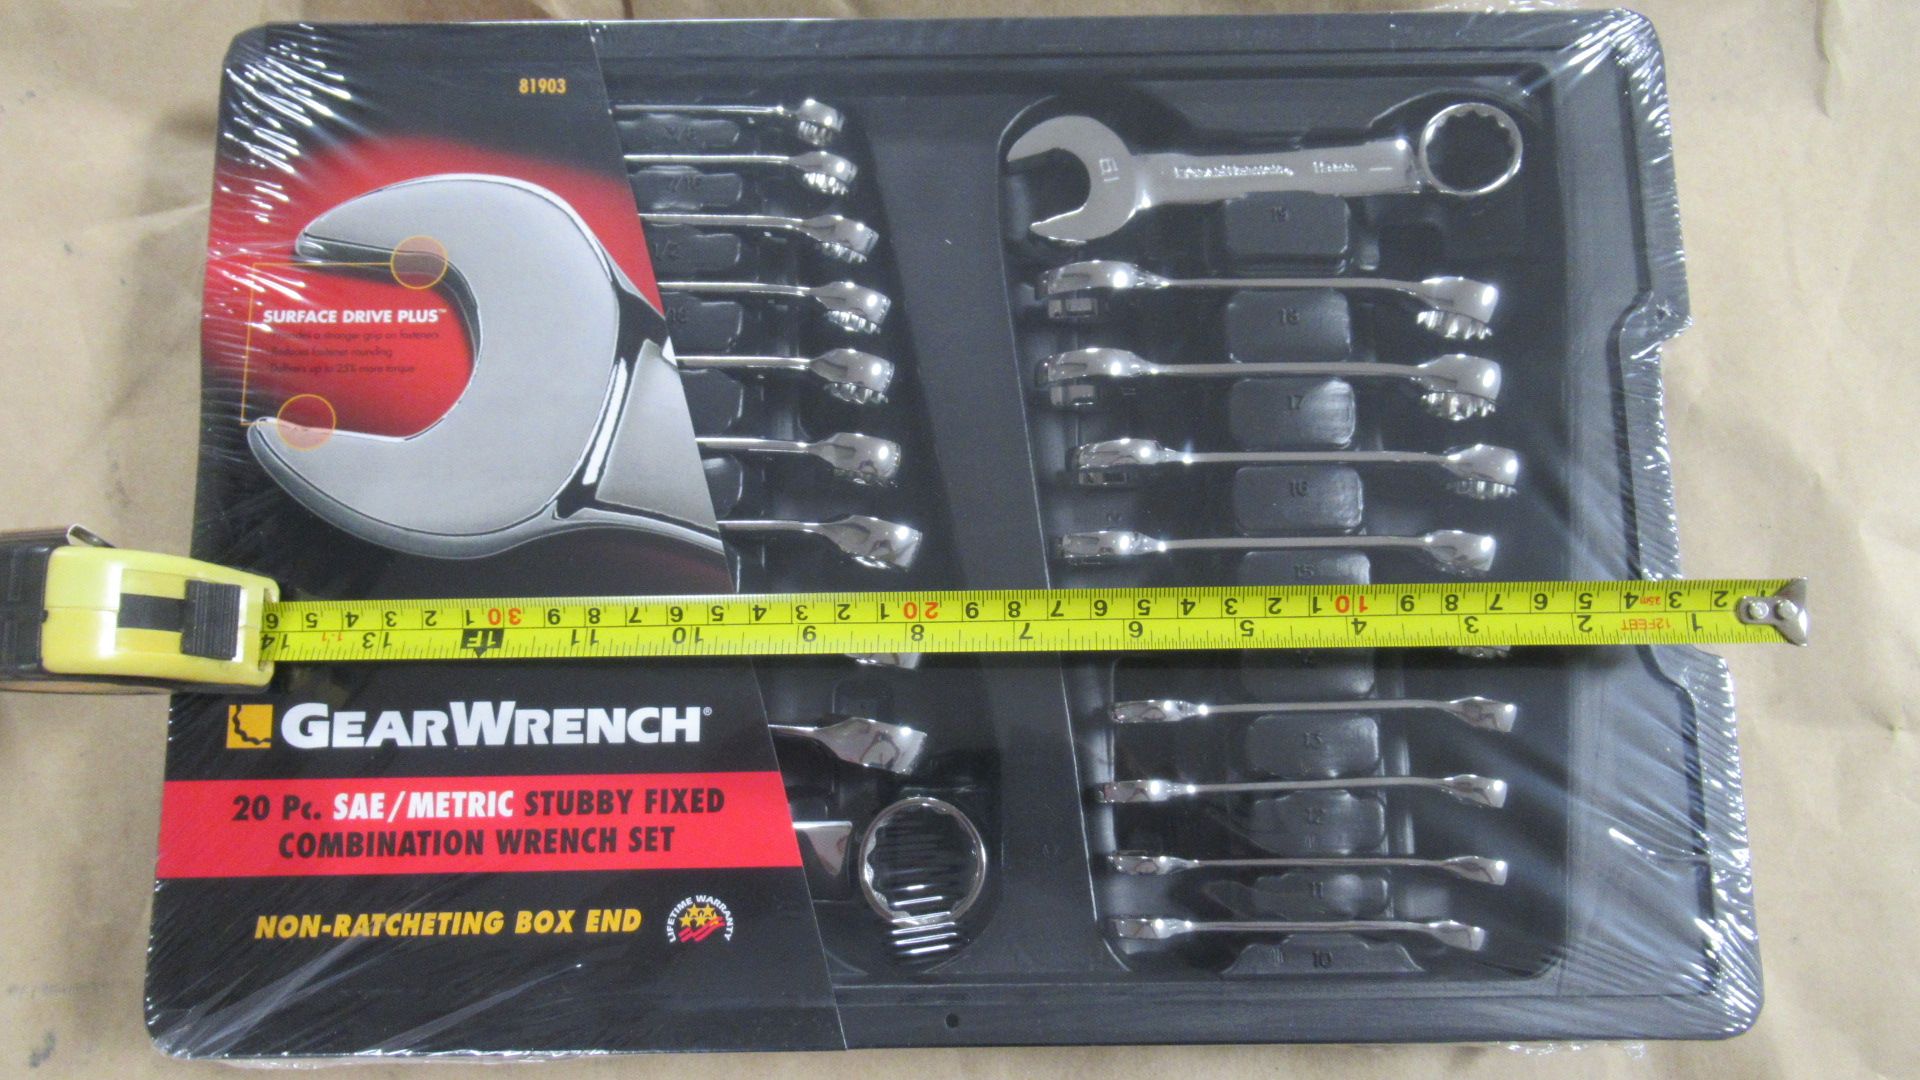 20 PC SAE/METRIC STUBBY FIXED COMBINATION WRENCH SET GW 81903